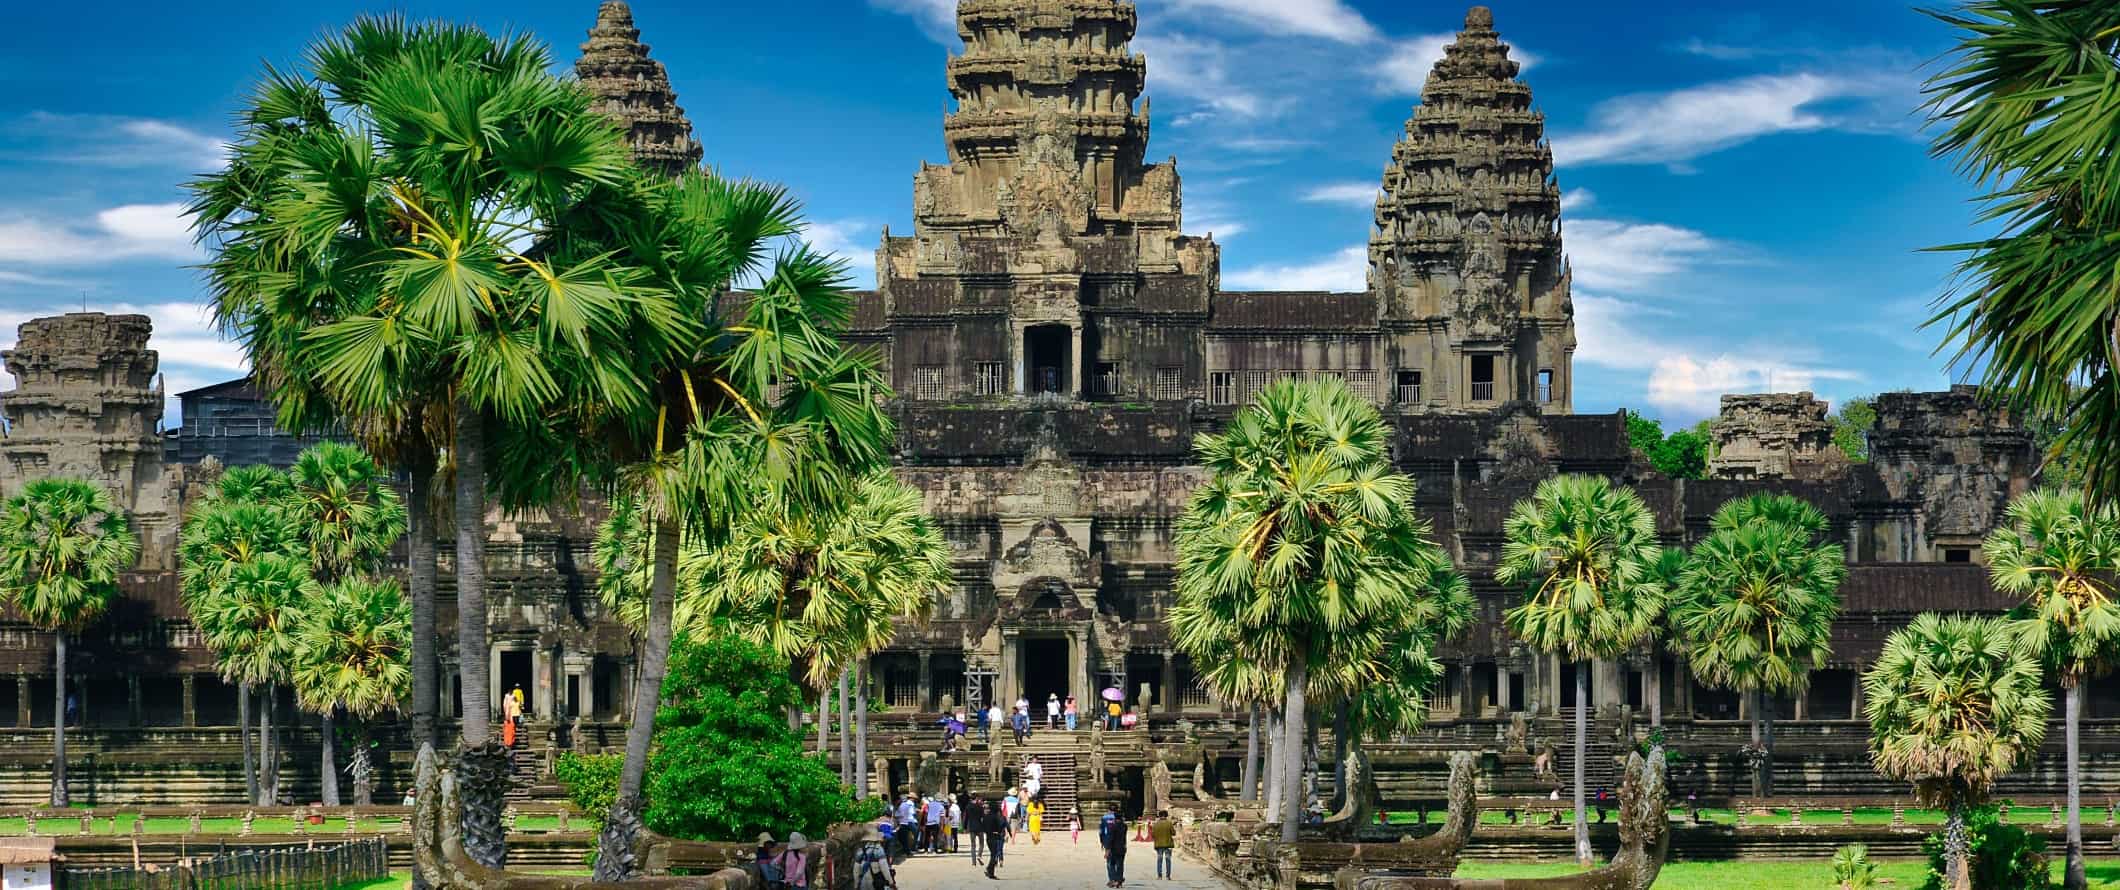 Visitors walking around in front of a large temple surrounded by tropical trees at the historic Angkor Wat complex in Cambodia